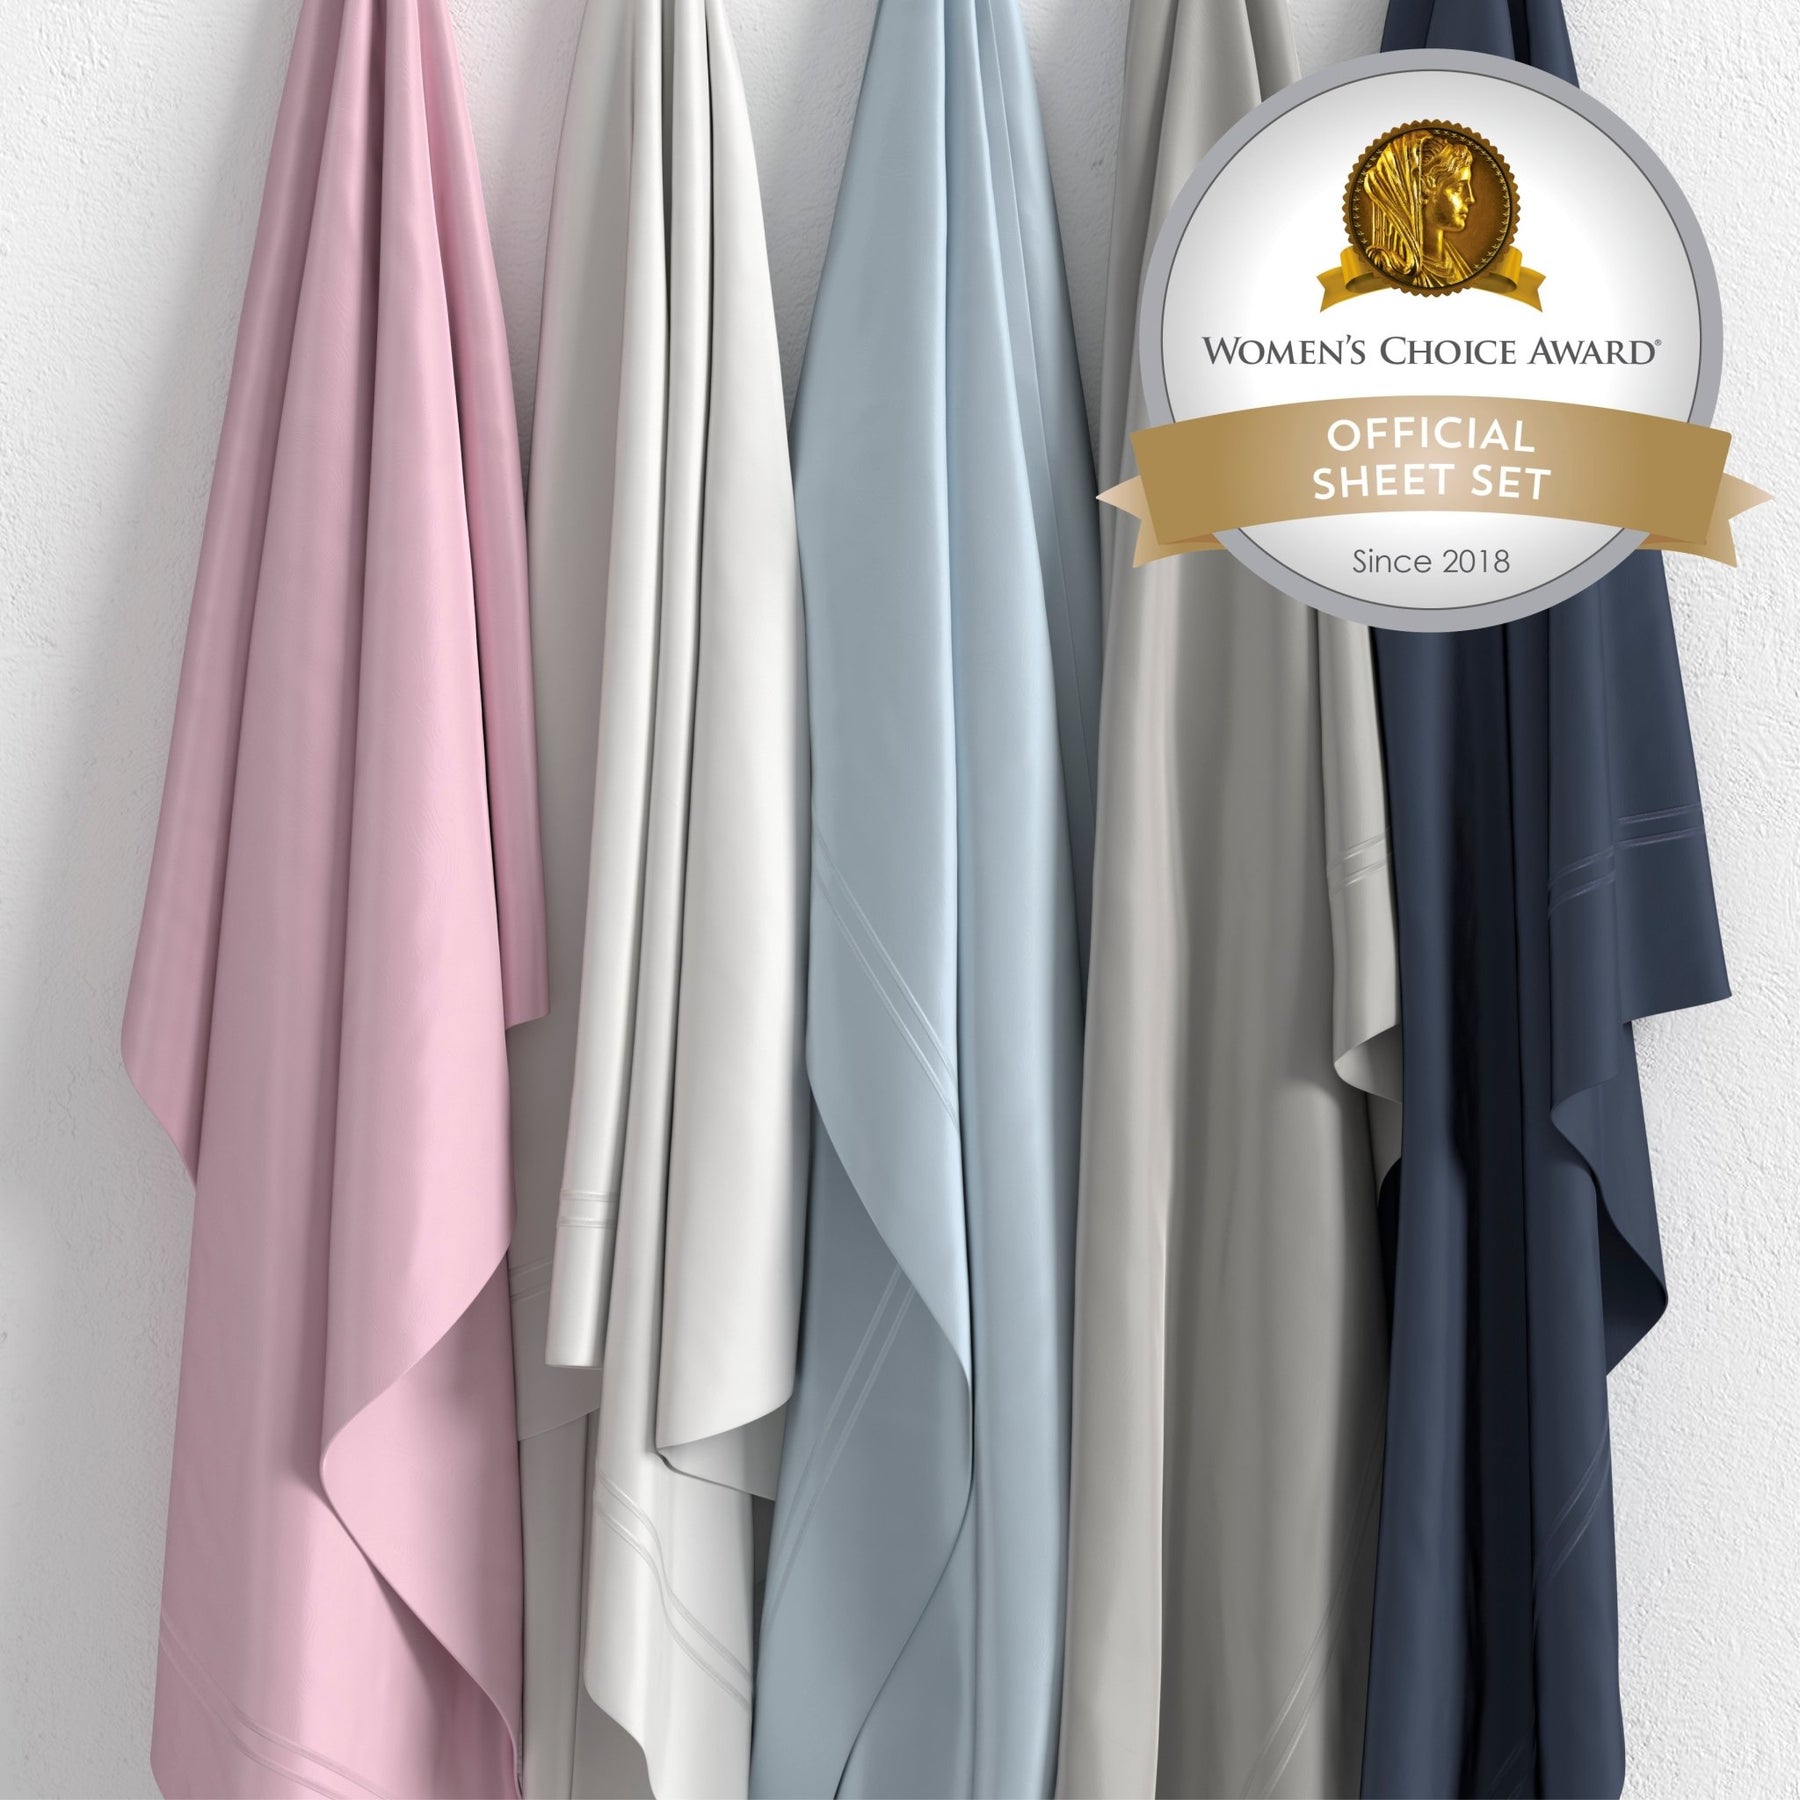 Image of all four color ways of Refreshing TENCEL™ Lyocell Sheet Set hanging in order of Lilac, White, Light Blue, Dove Gray, Celestial Blue with a sticker in the top right corner saying "Women's Choice Award Official Sheet Set Since 2018"